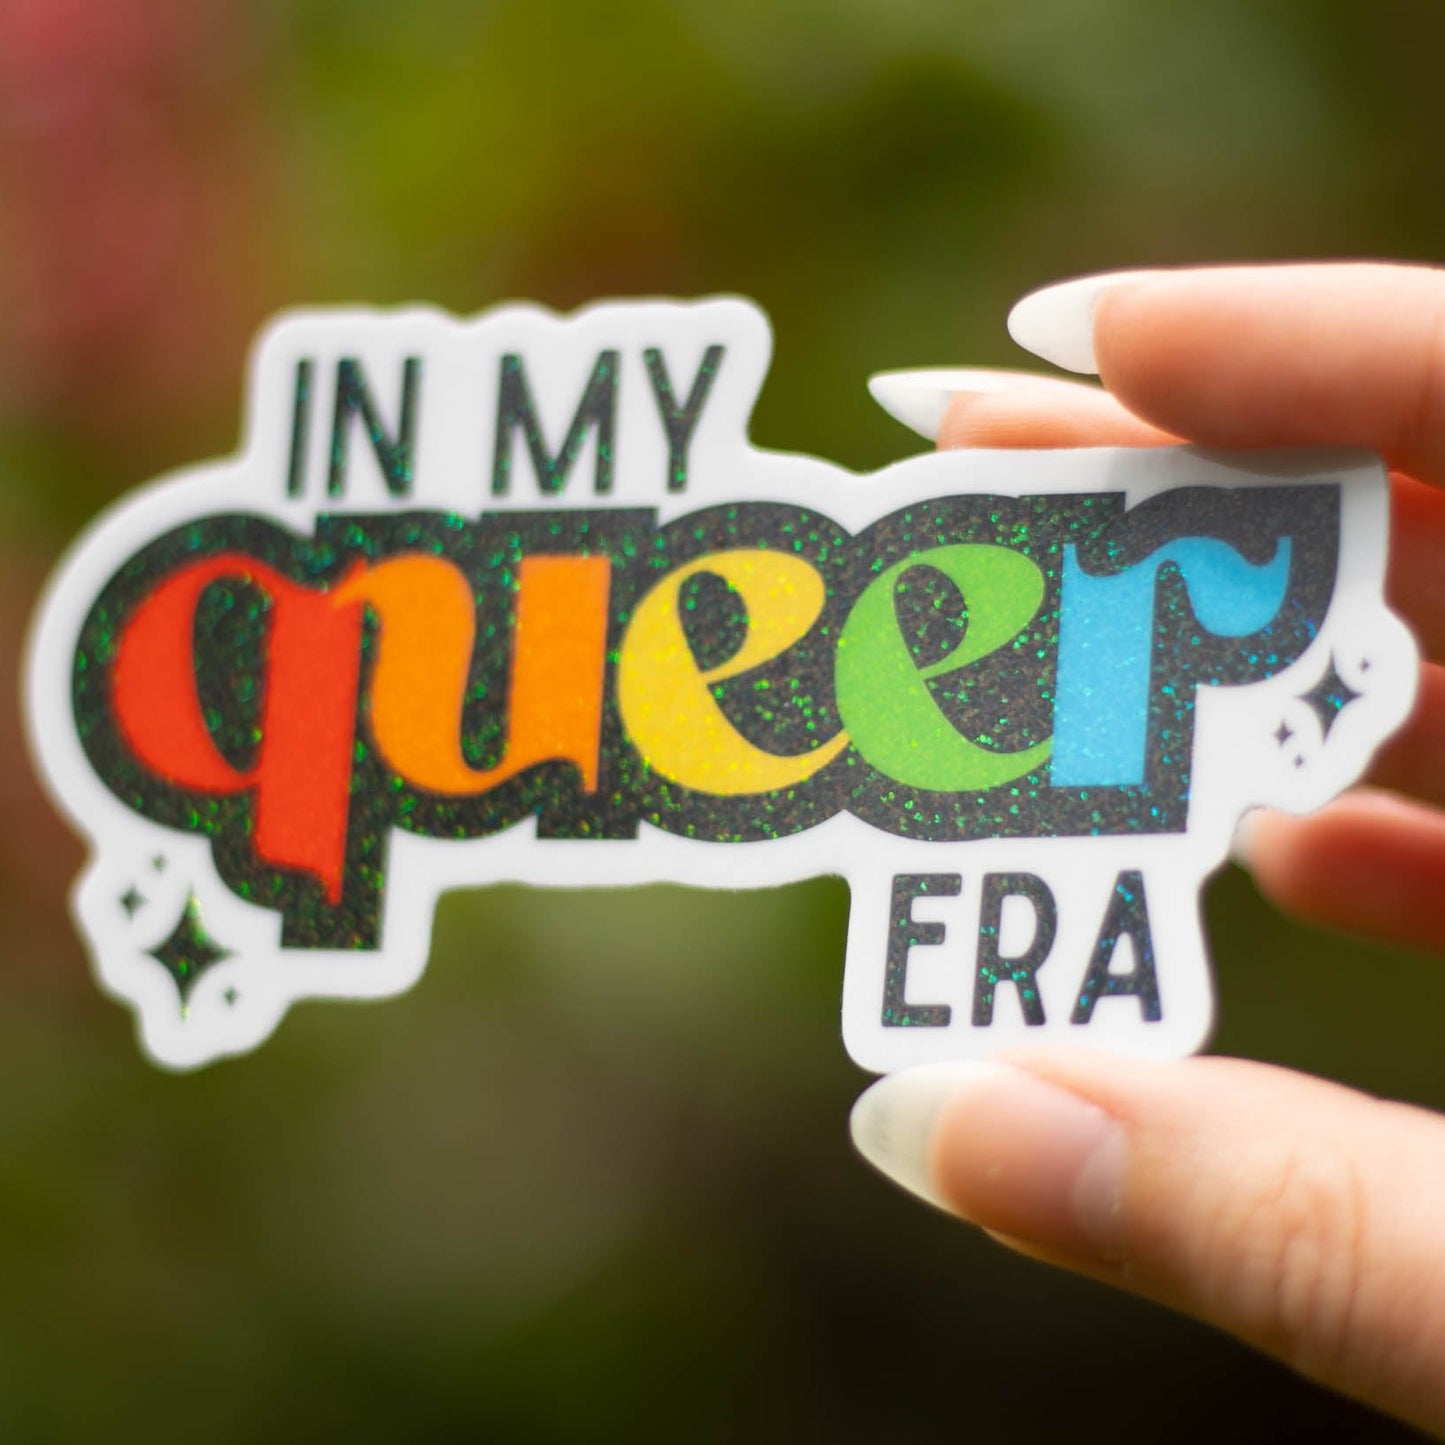 a close up picture of the in my queer era sticker. the sticker is the phrase in my queer era. the word queer is in a font with small flourishes around the edges. Each letter of the word queer is a different color from red, orange, yellow, green and blue. Around the word are two sets of sparkles.